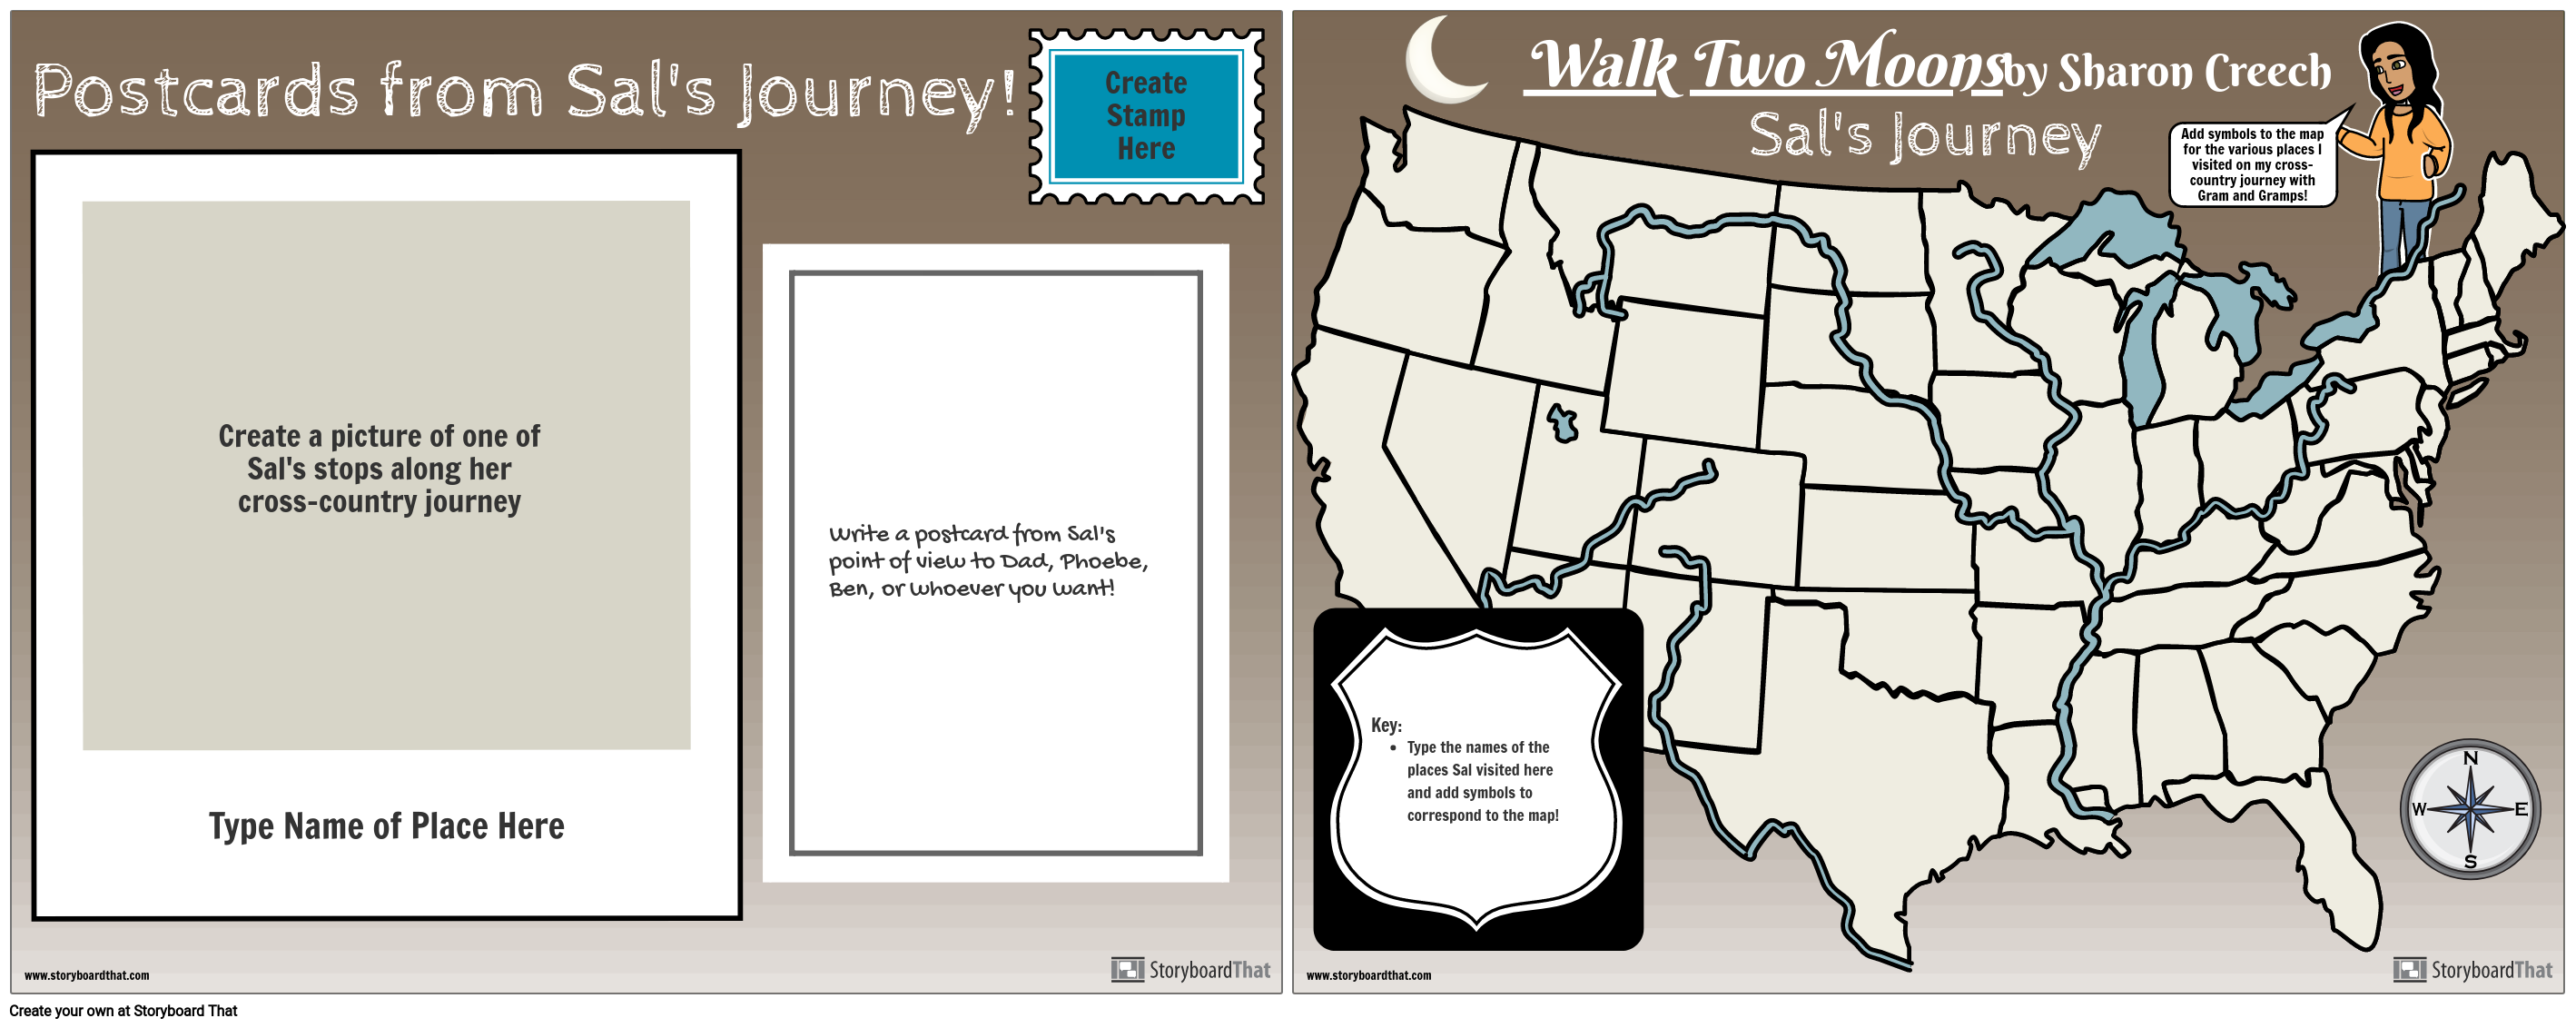 Walk Two Moons Setting Template